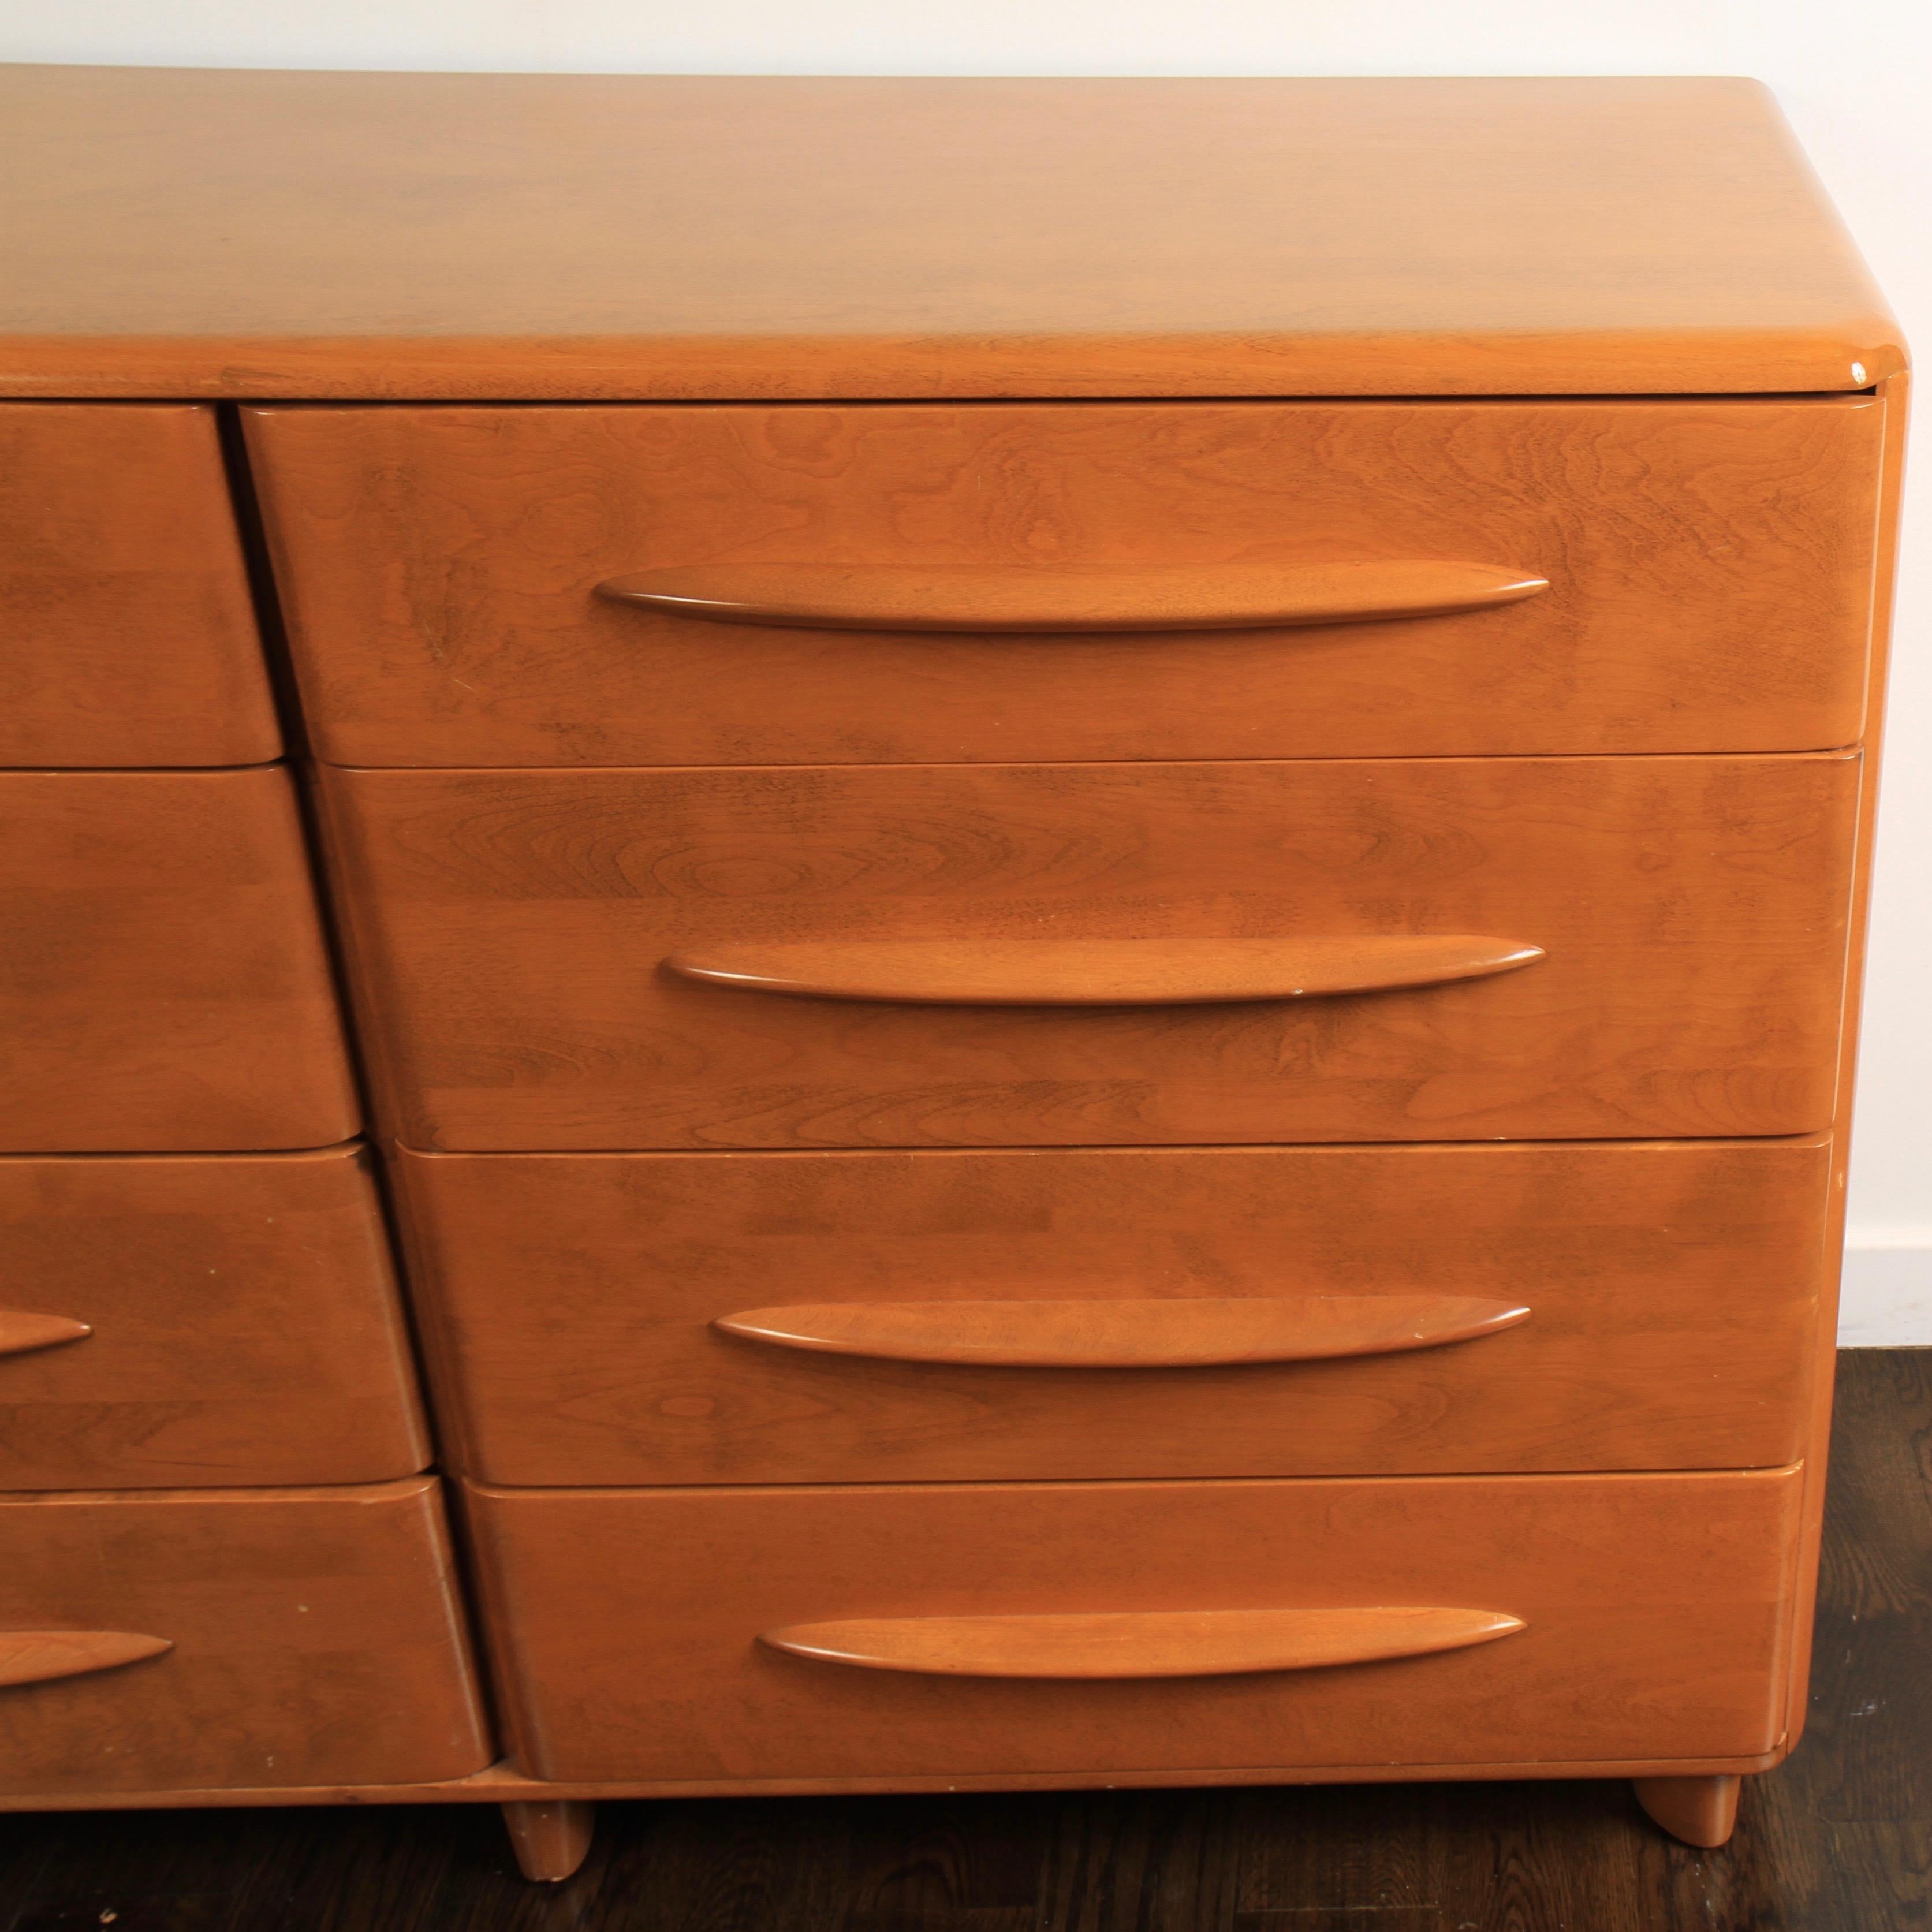 Clean, solid birch, eight-drawer dresser in original champaign finish. 

In 1897, two prominent furniture companies, Heywood Brothers (est. 1826) and Wakefield Company (est. 1855) merged to create Heywood Brothers & Wakefield Company; the name